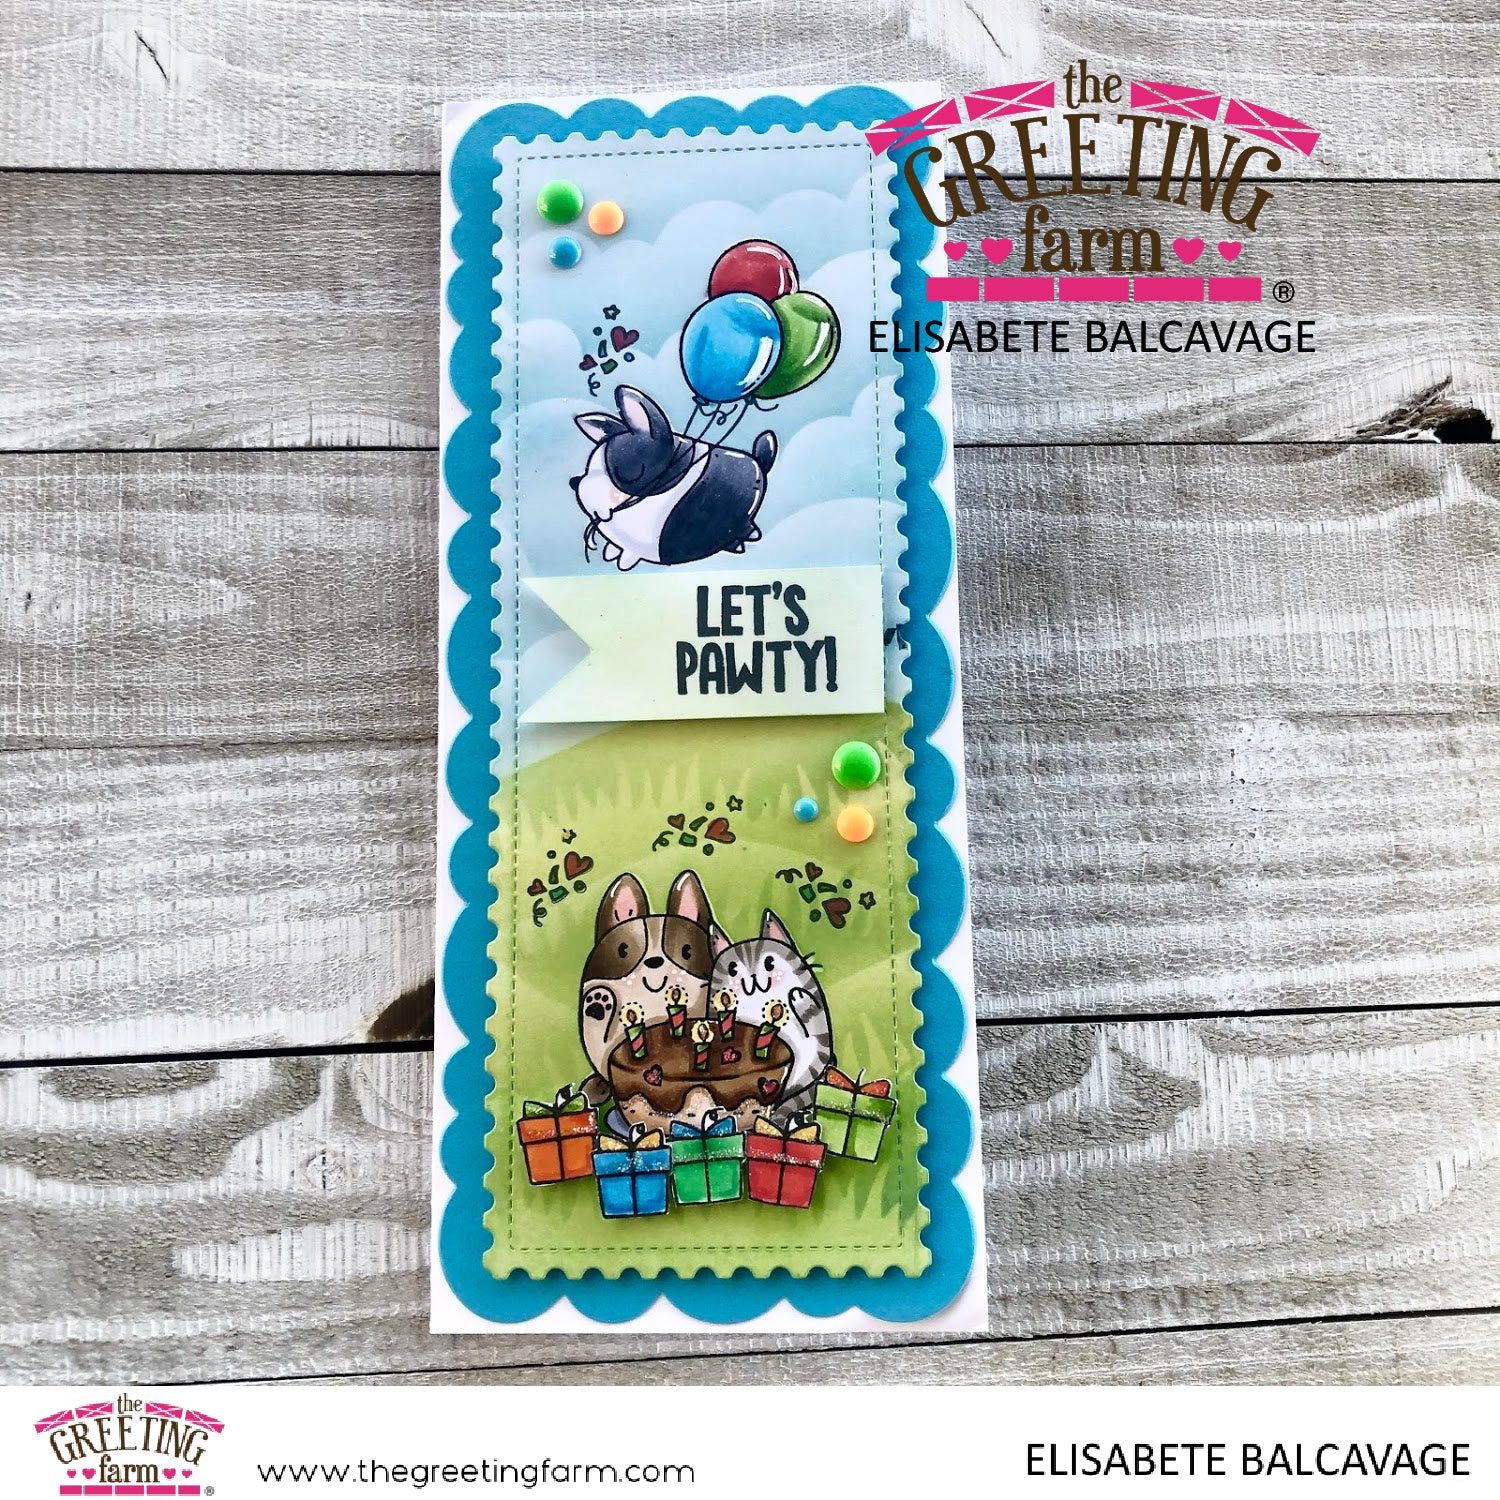 Let's Pawty! Birthday Card